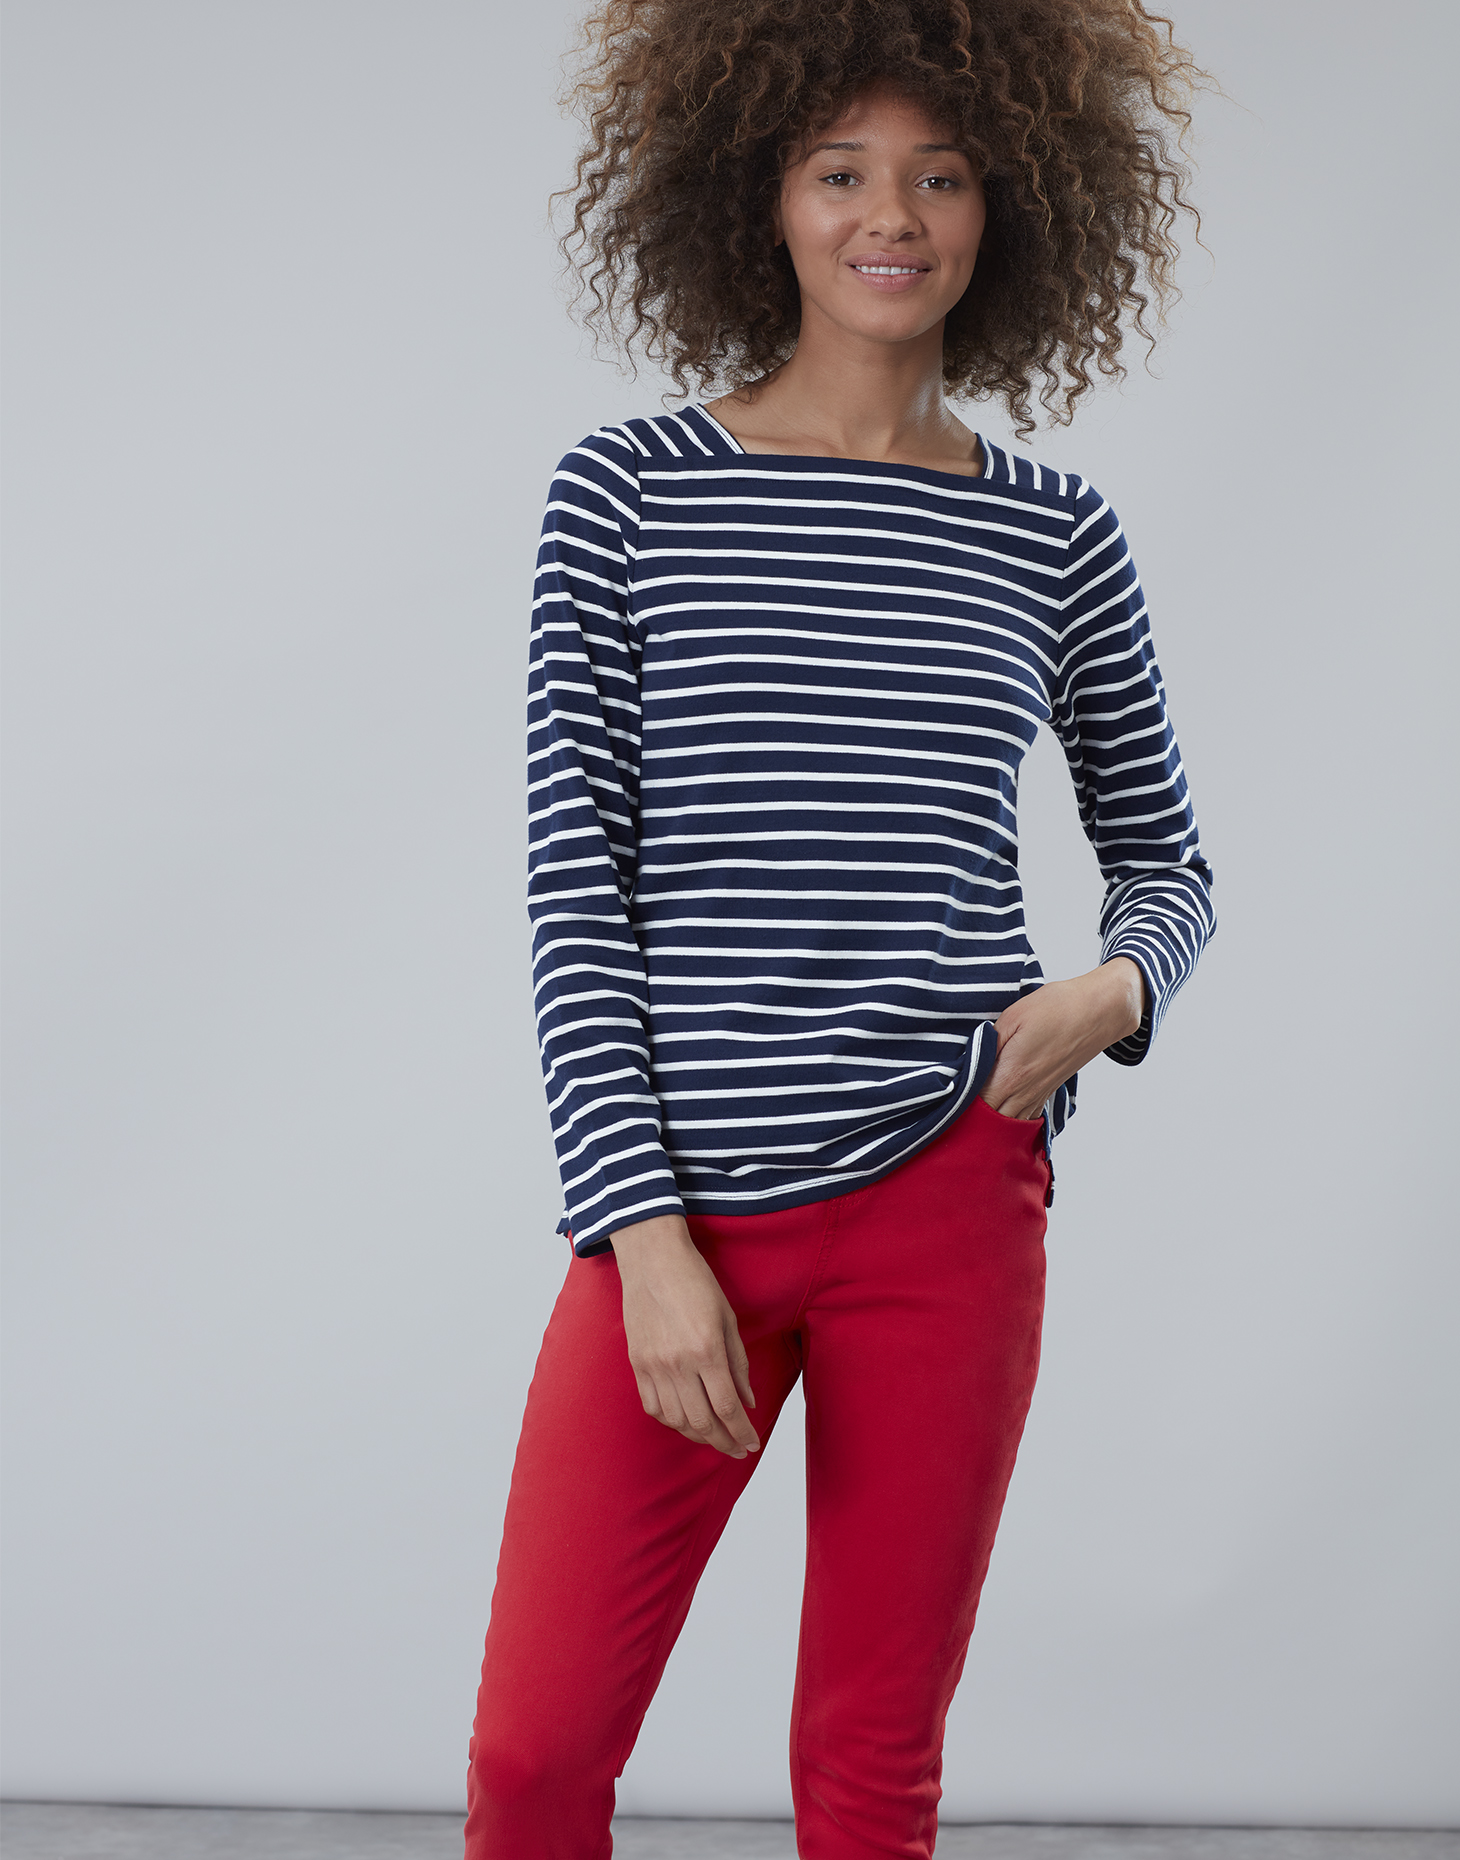 Joules Matilde Square Neck Jersey Top for Her